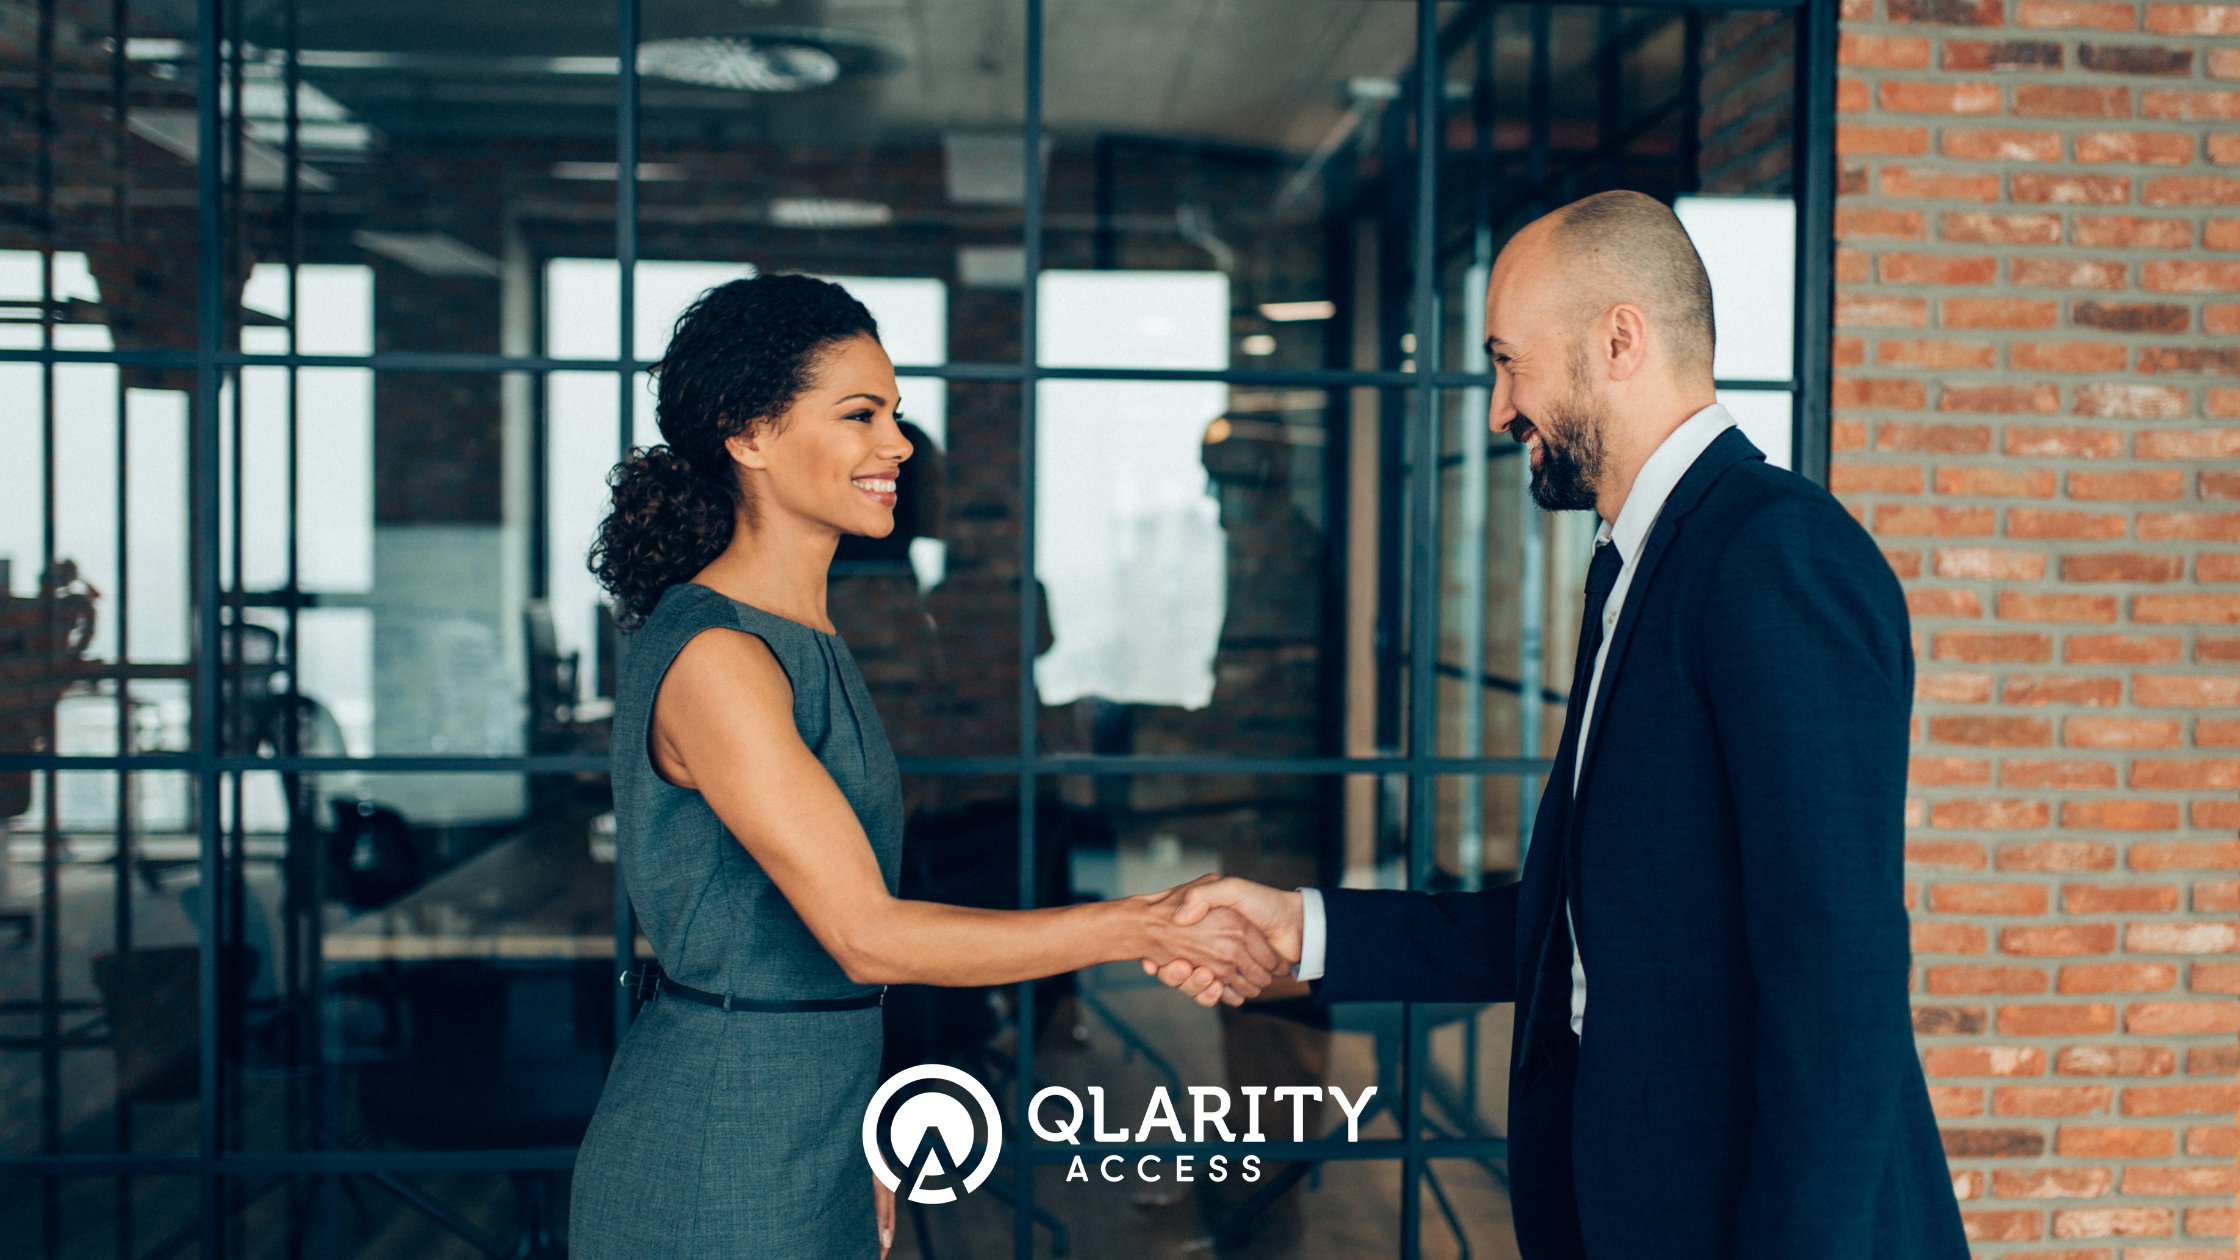 Navigating the Partnership Journey with Qlarity Access